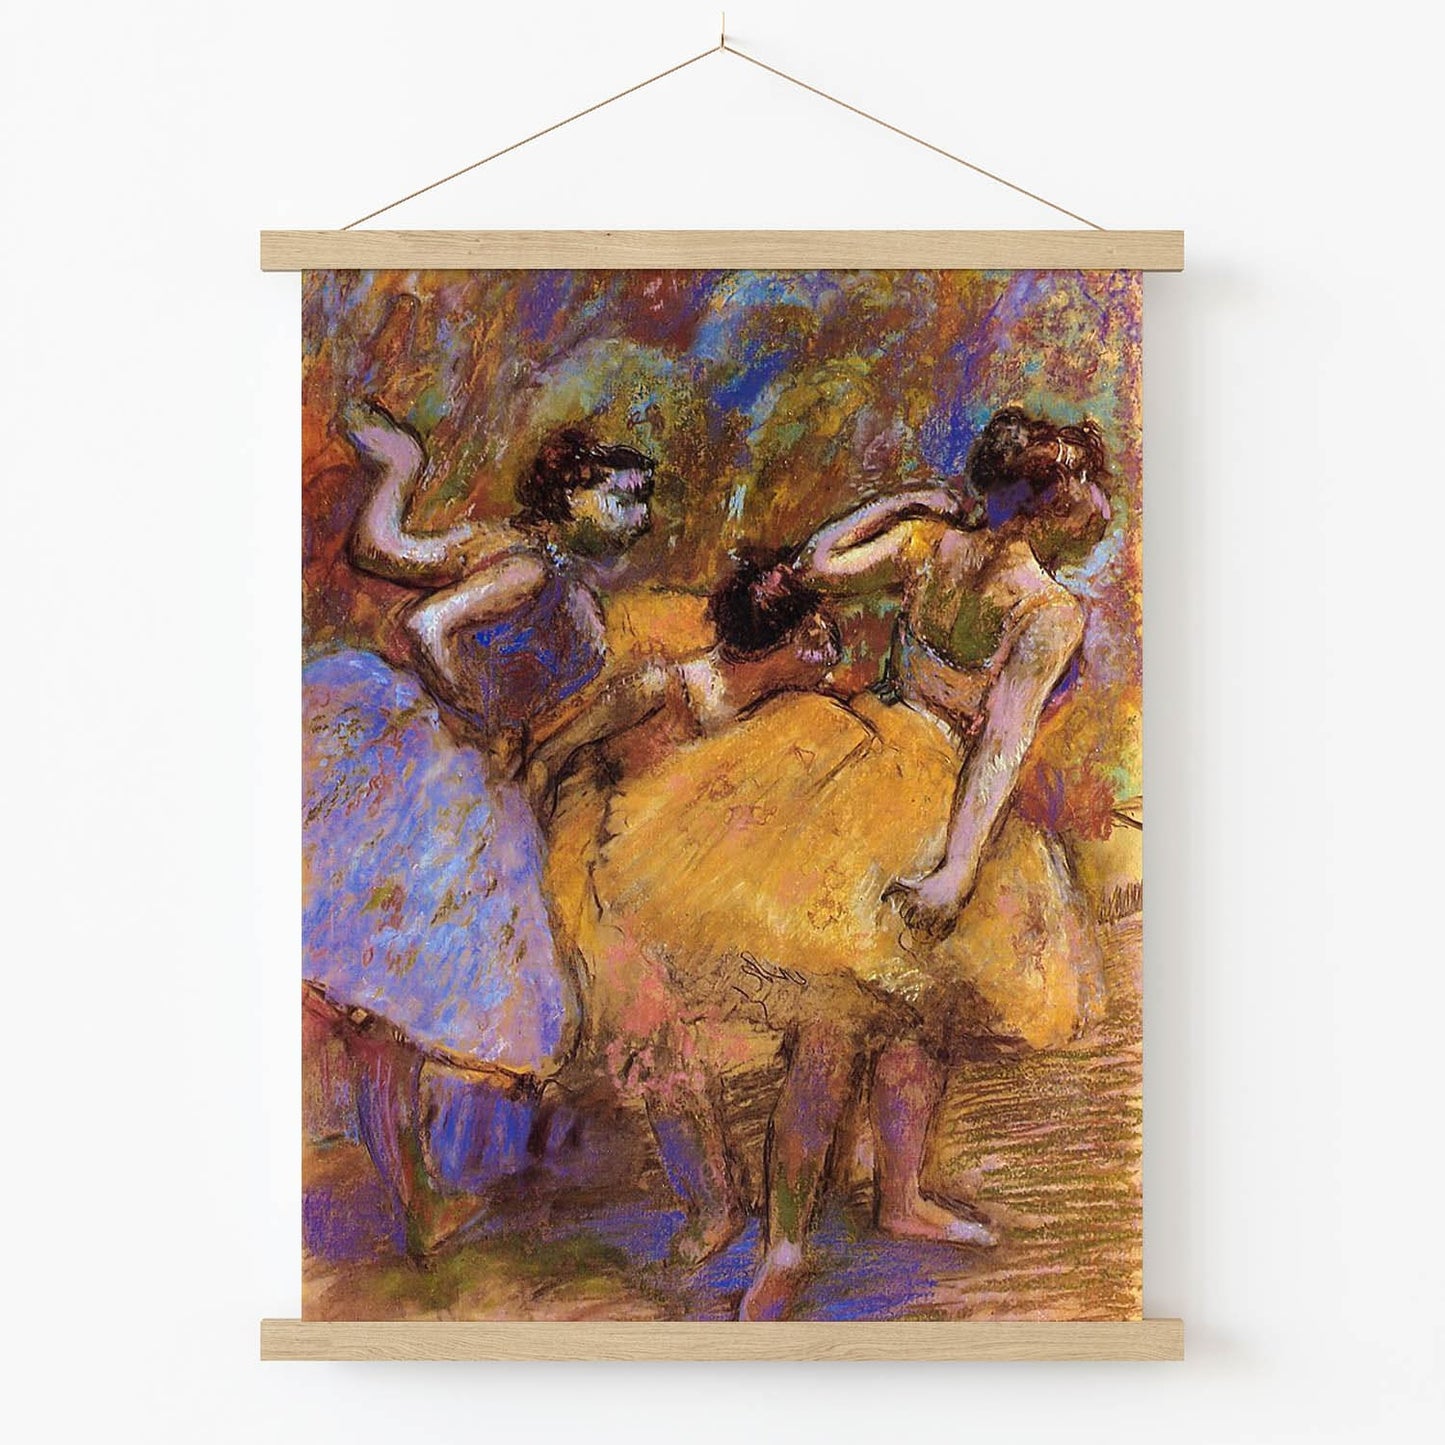 Dancers in Yellow and Violet Art Print in Wood Hanger Frame on Wall